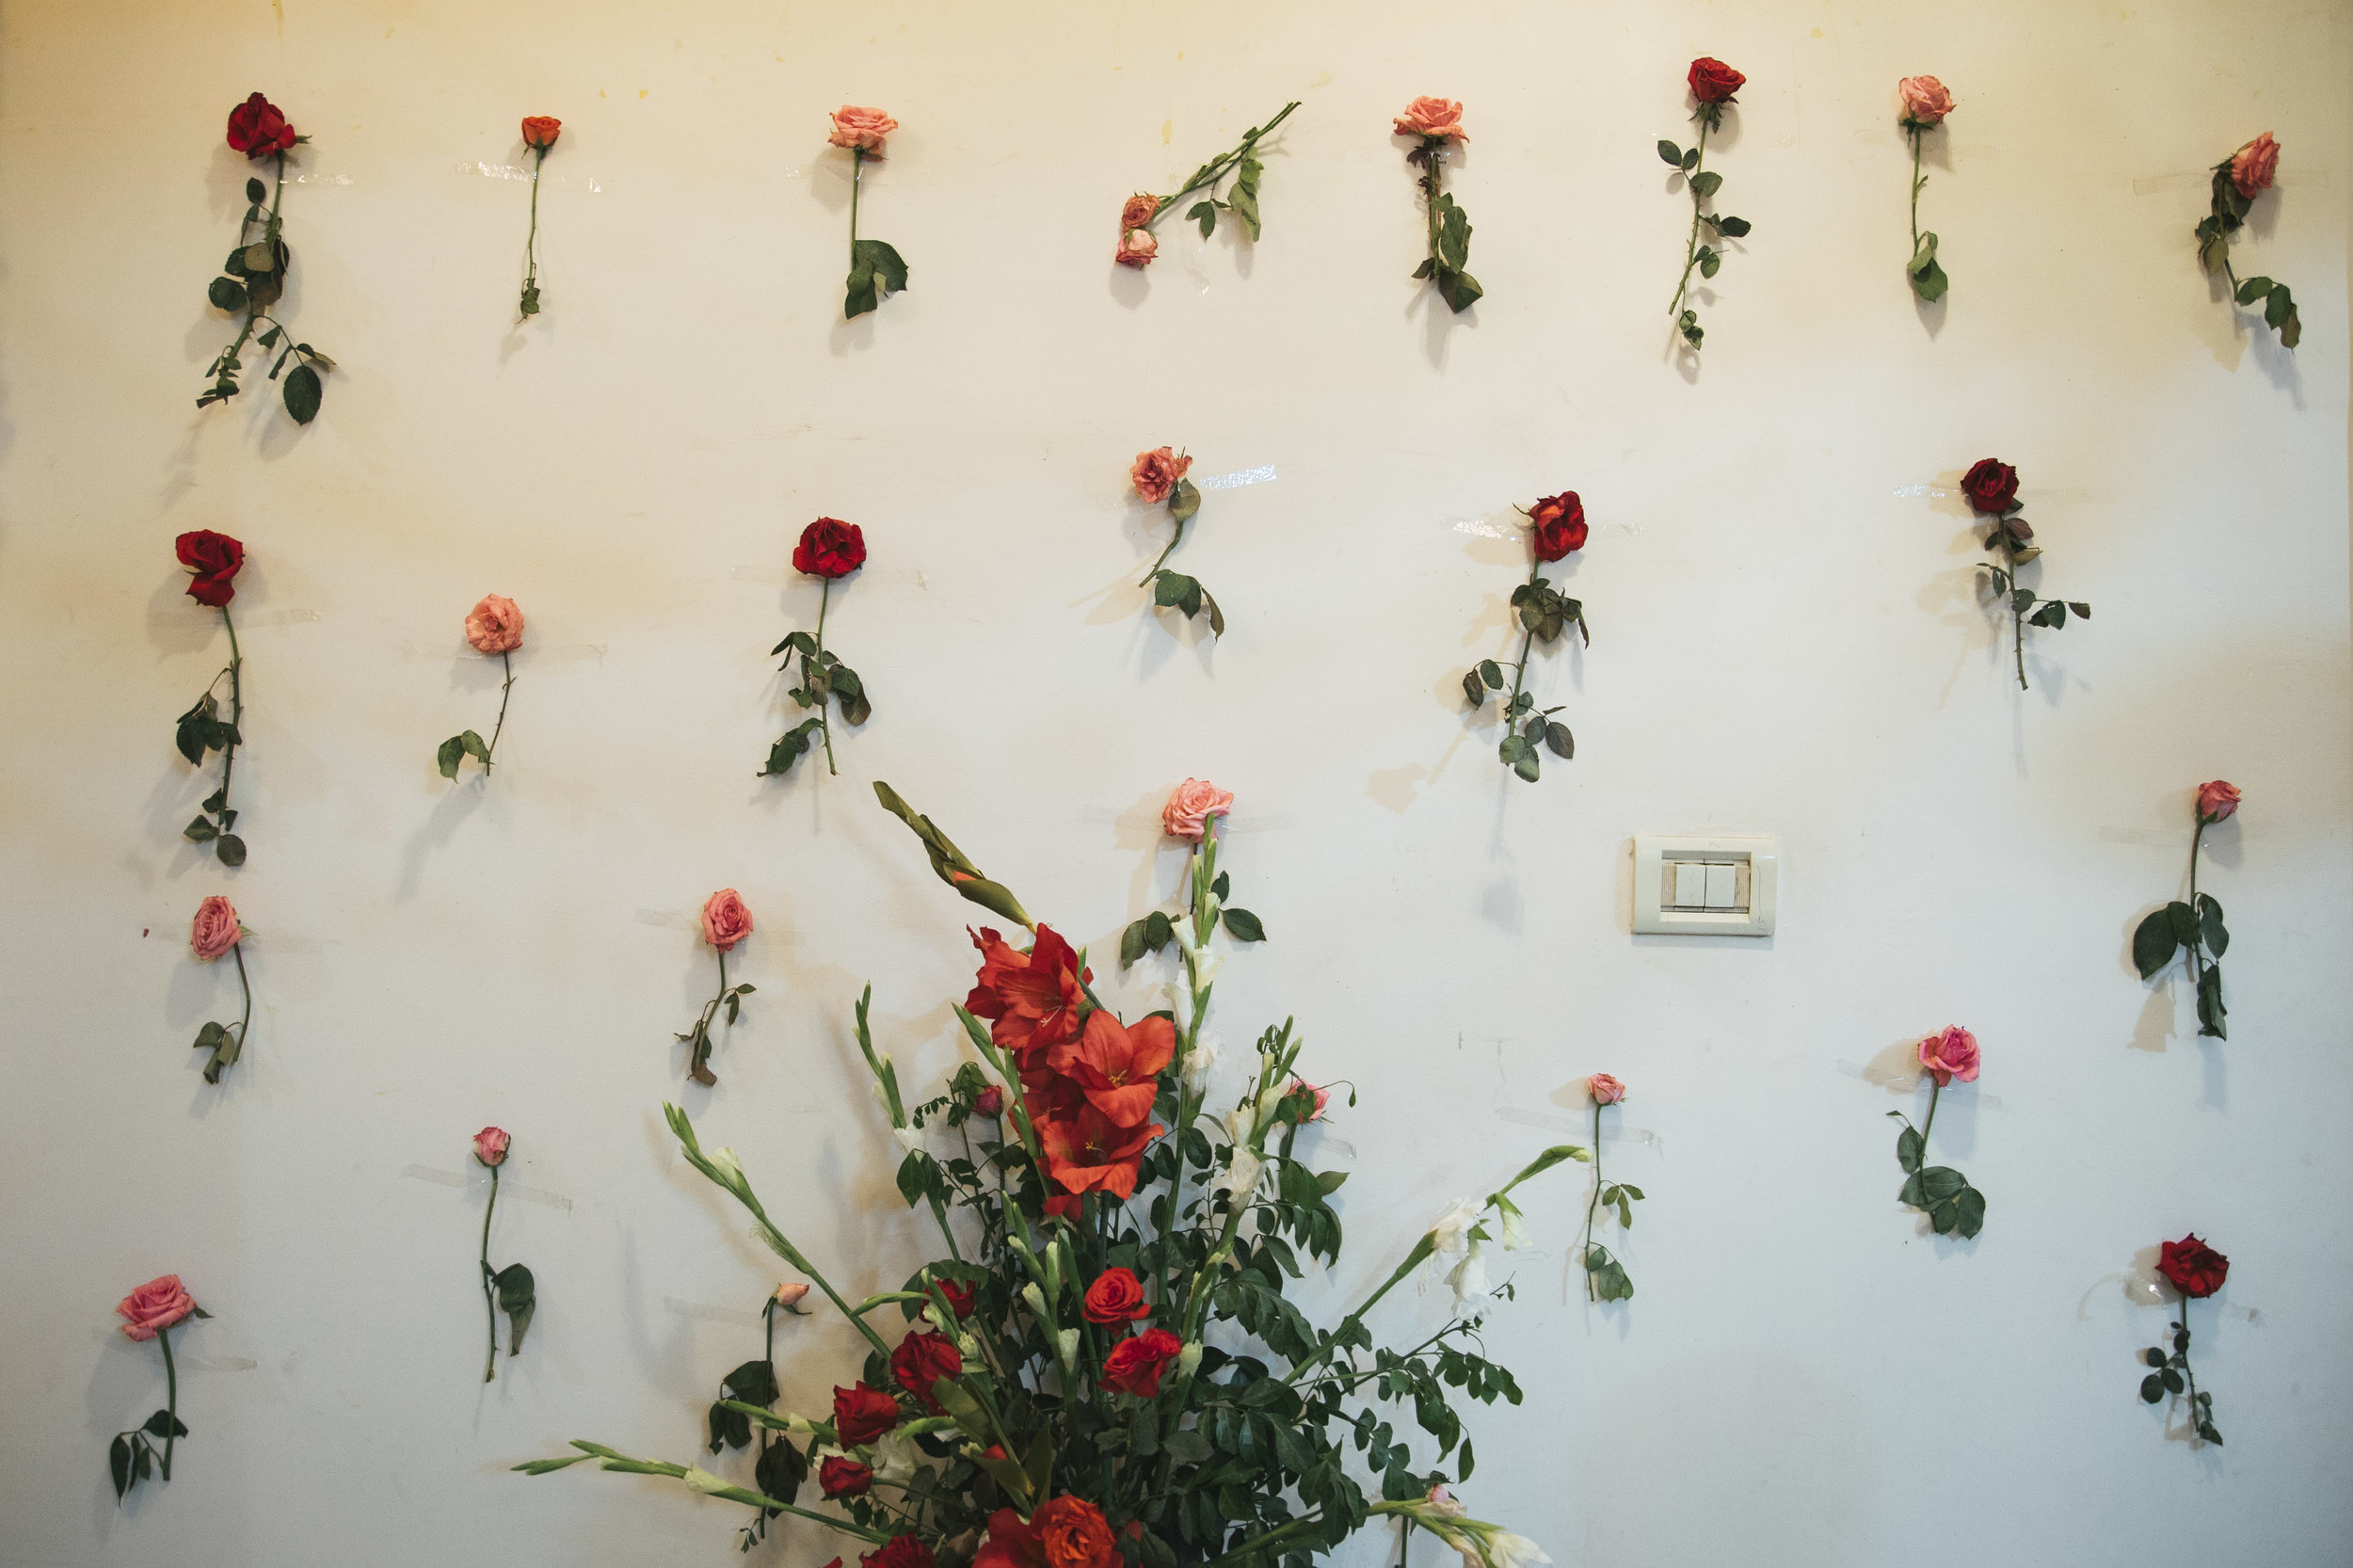  The groom's home is decorated with roses during the week of the wedding. Family members come from all over the country to visit with the family during the celebration. Every day, after the ceremony and festivities are over at the wedding venue, the 